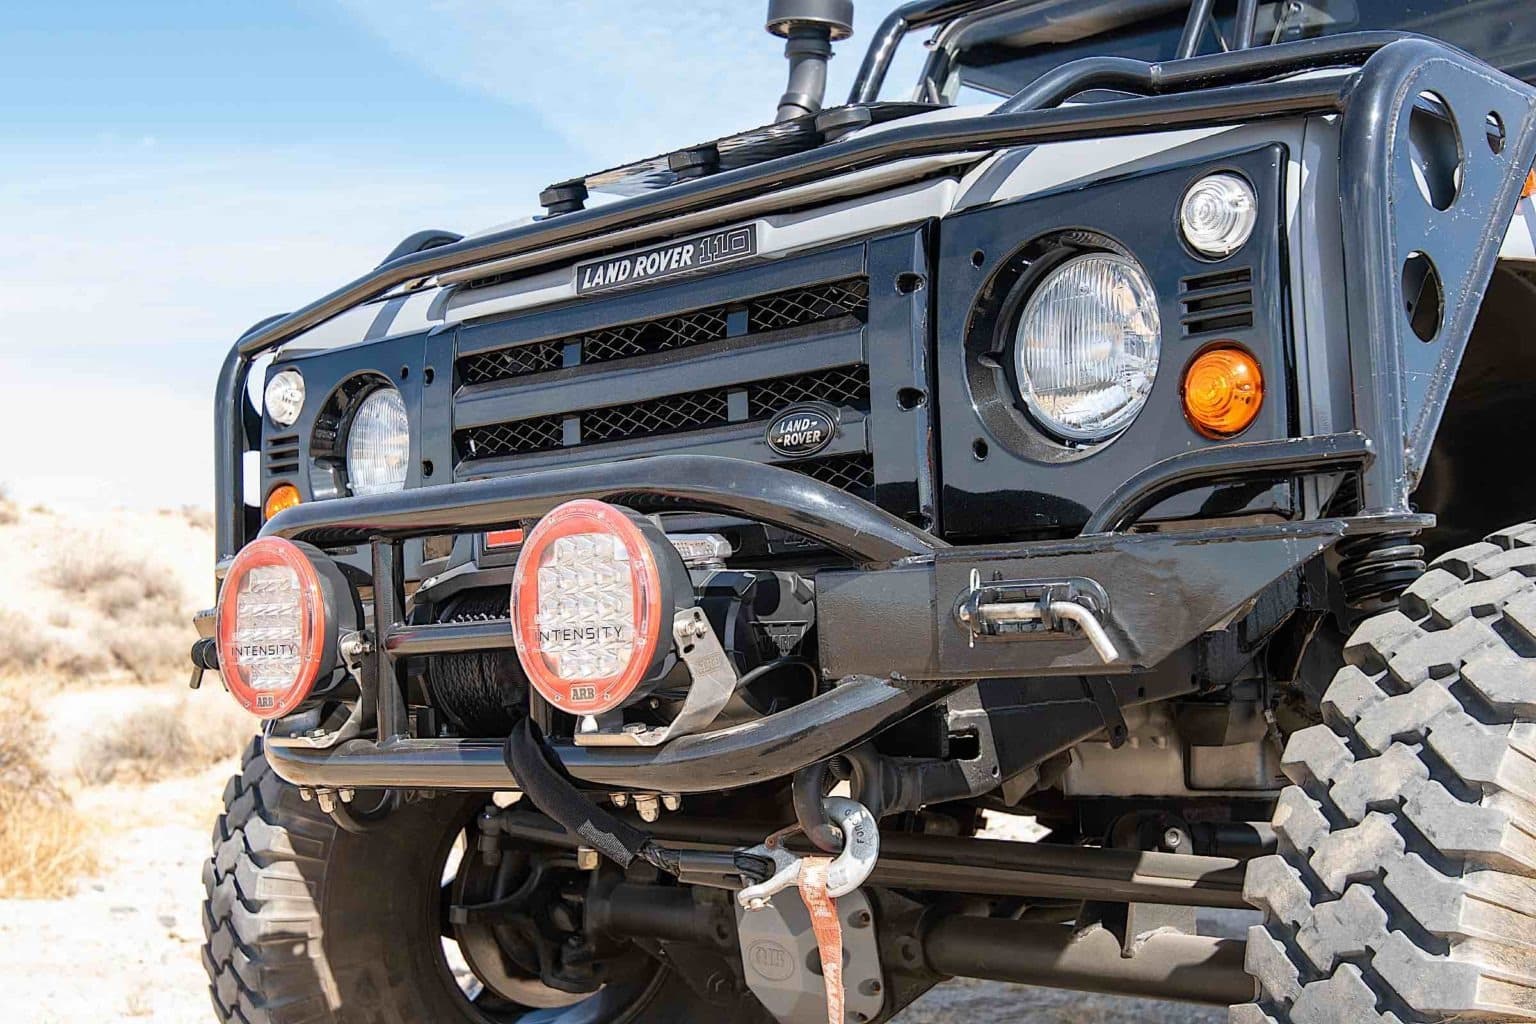 The front of this 1984 Land Rover Defender 110 is ready for action.